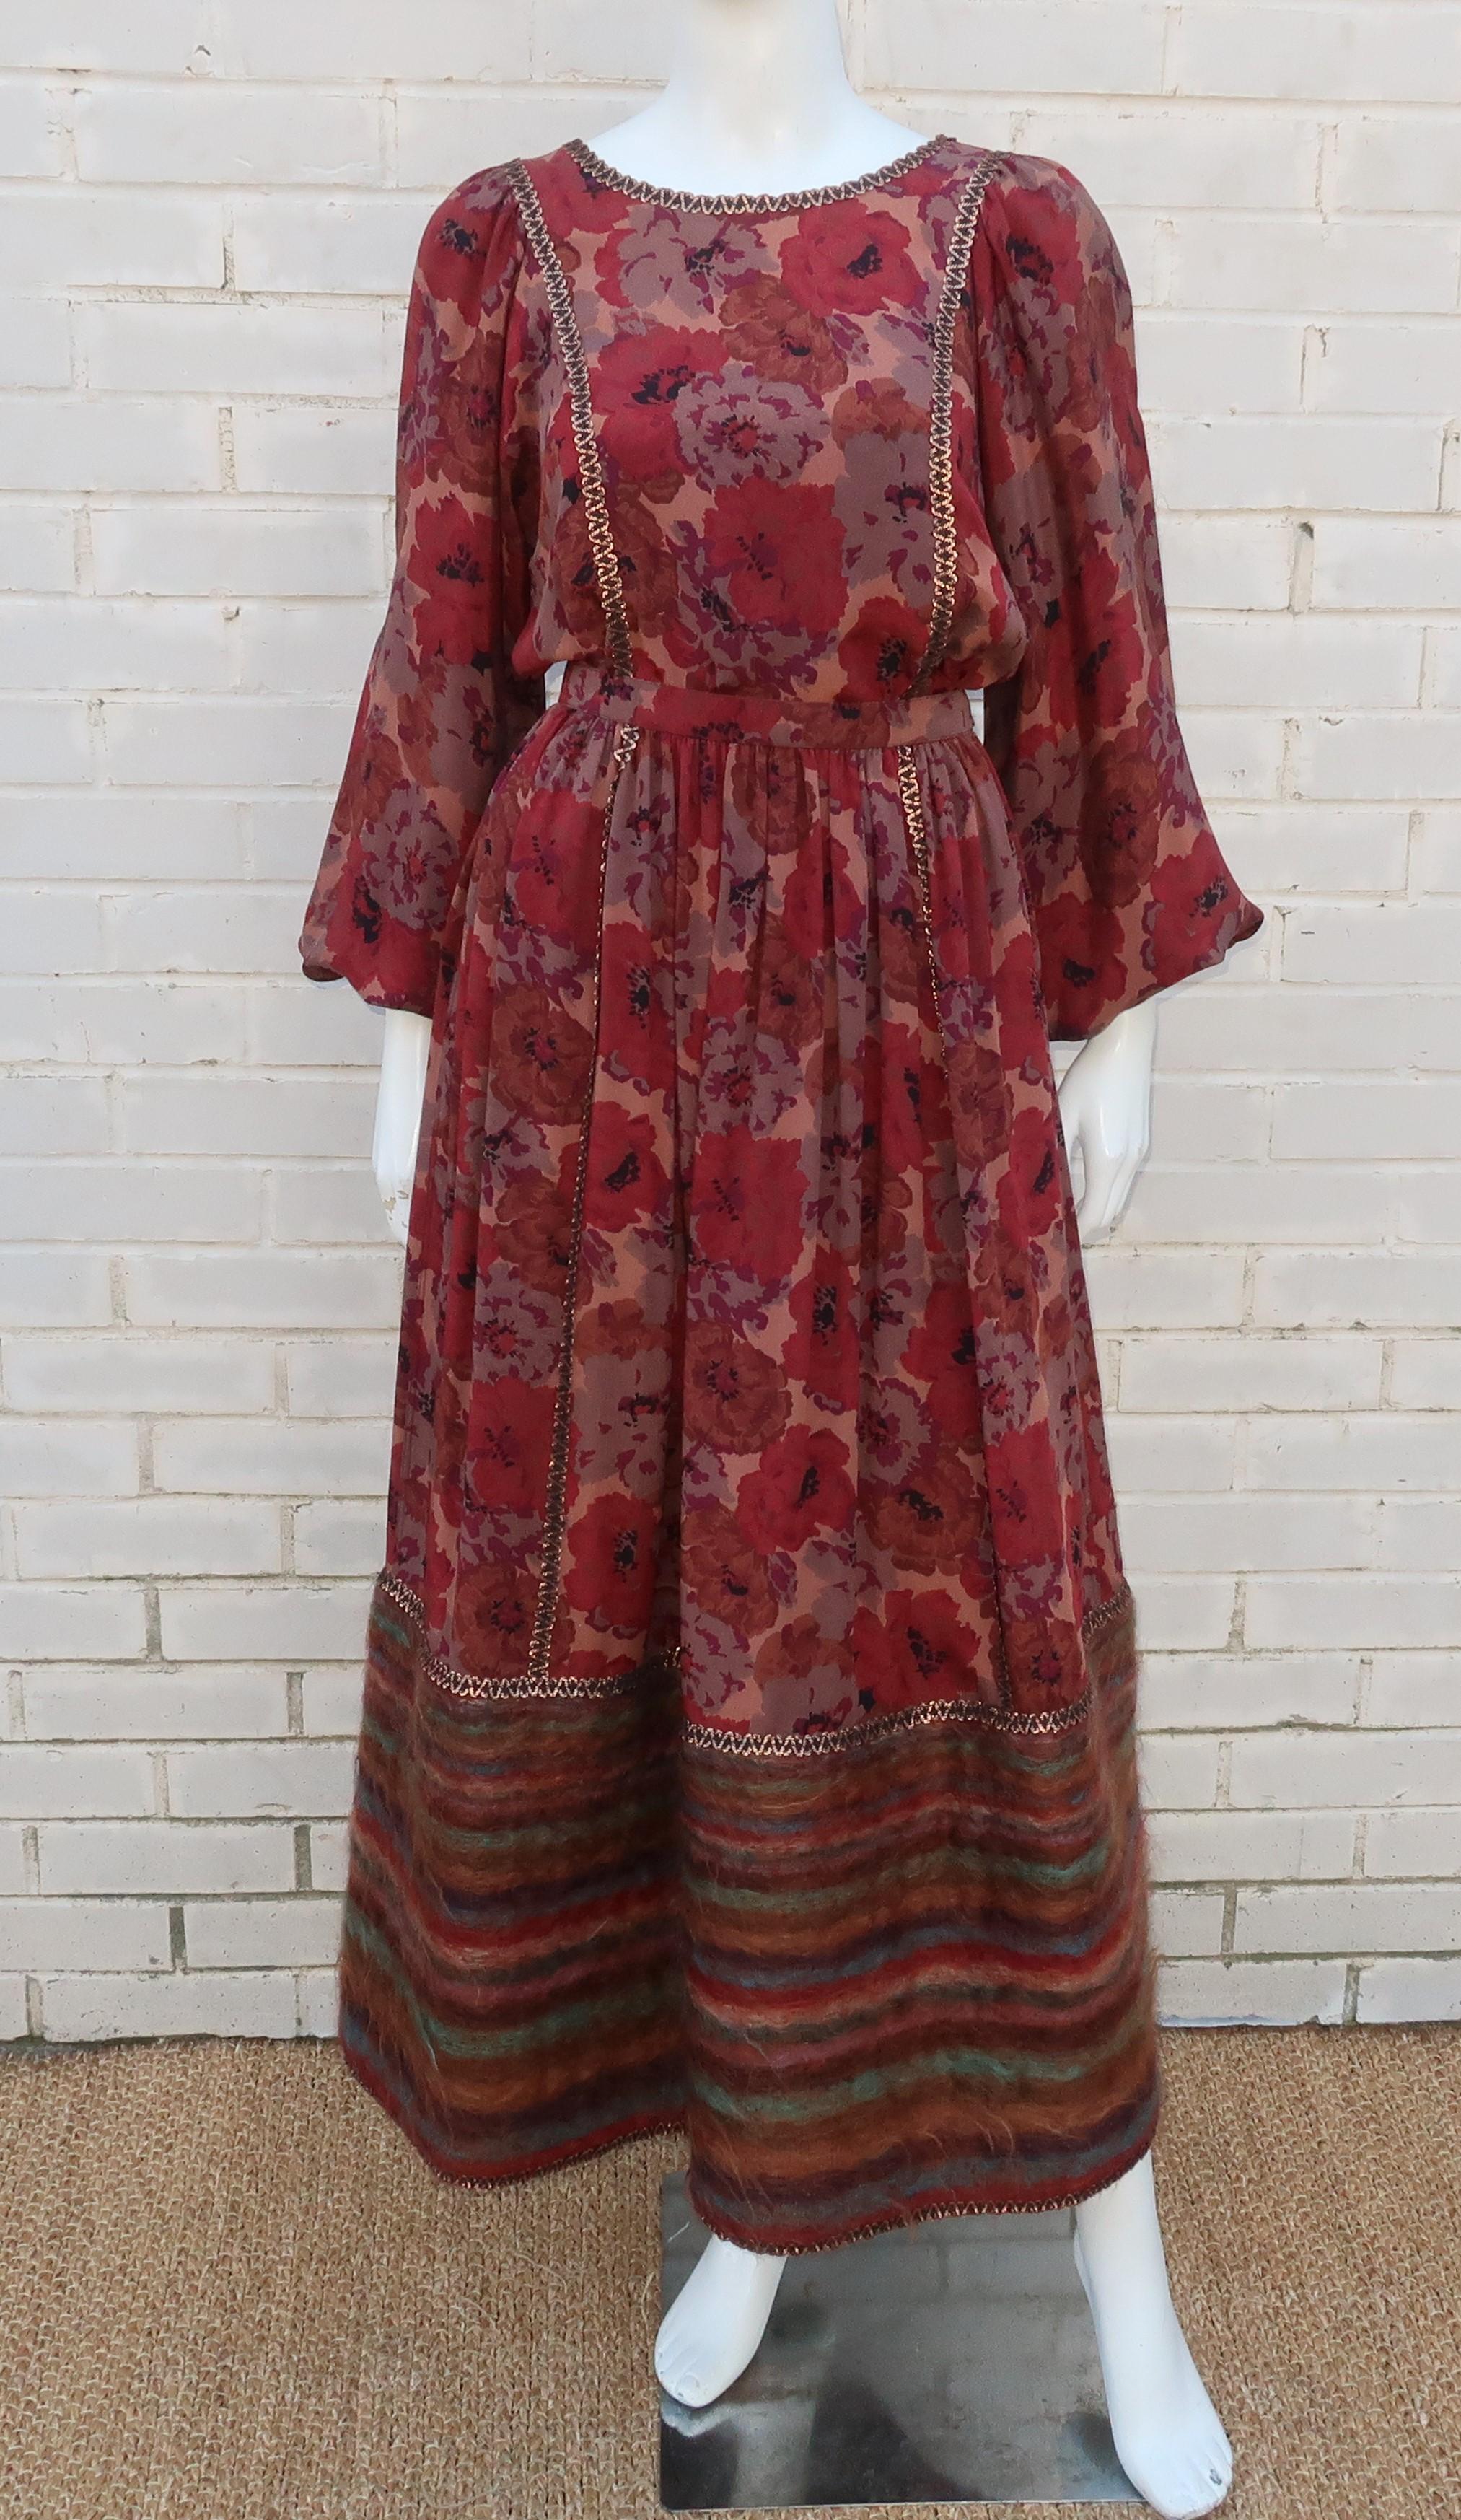 Geoffrey Beene's two piece dress ensemble is a masterful mix of a casual peasant style silhouette with luxurious details including a gorgeous silk crepe fabric, coppery bronze metallic braid trim and a mohair hemline.  The autumnal colors of the